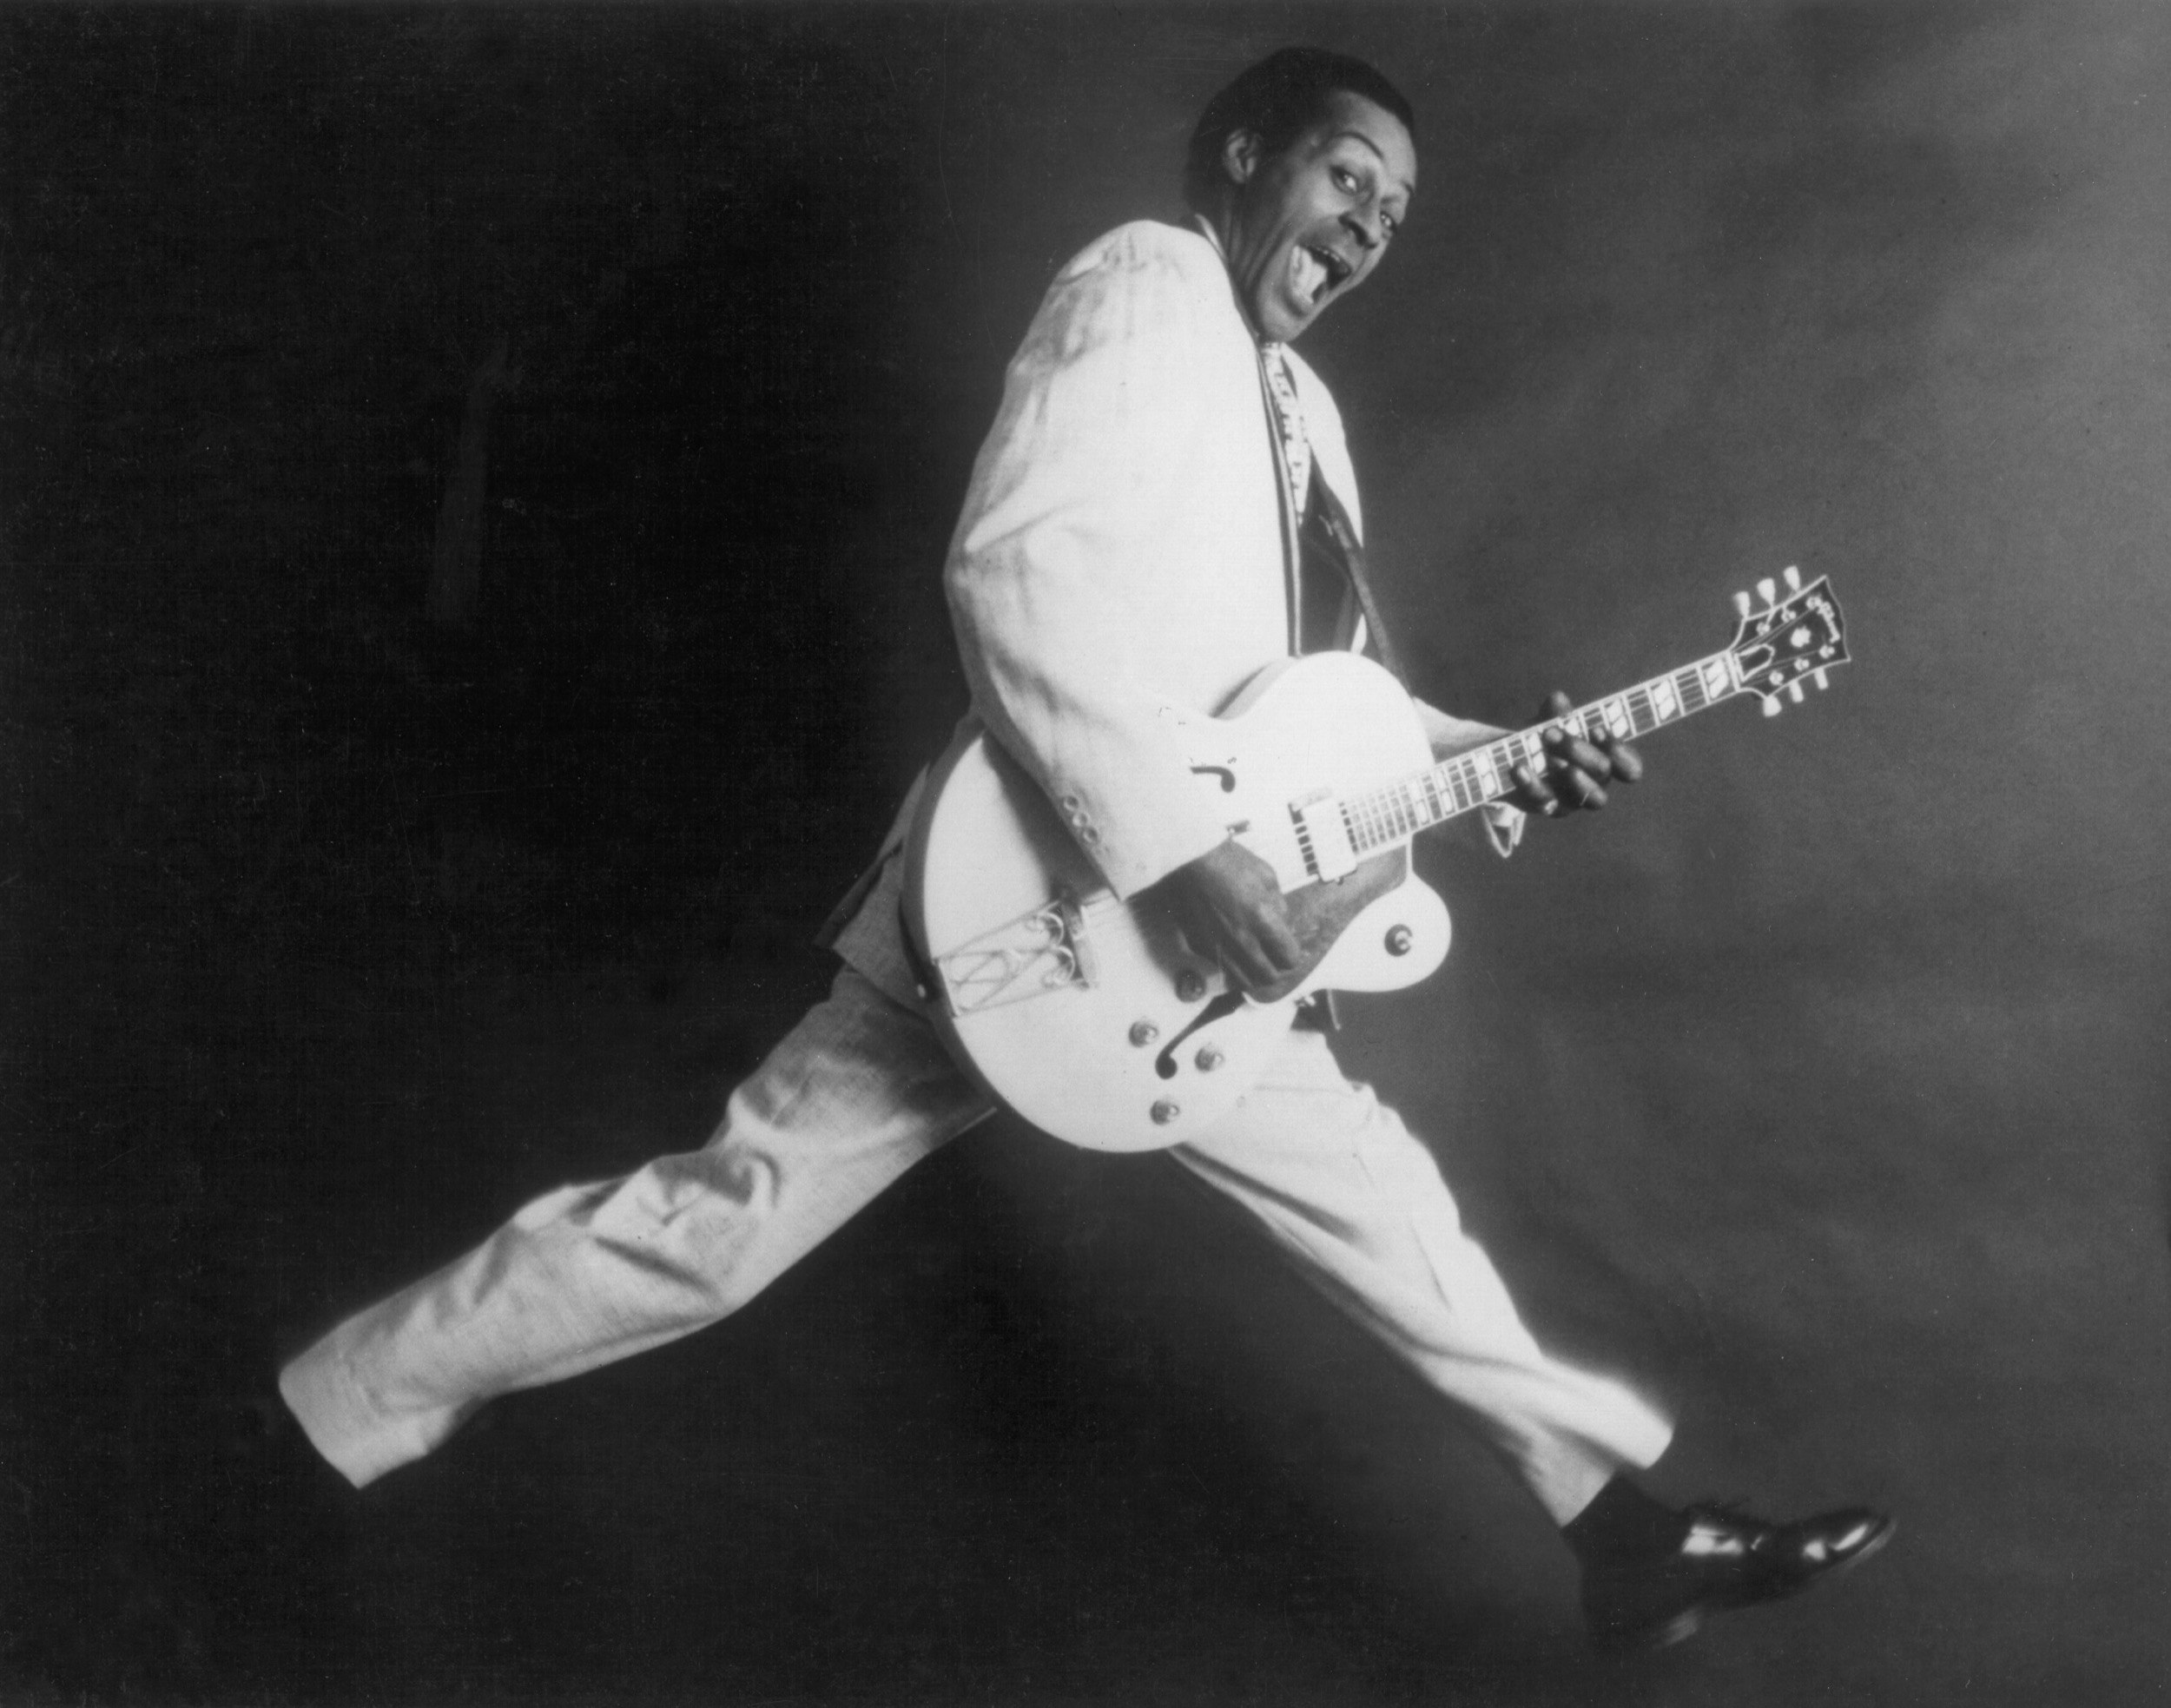 Chuck Berry jumps in the air while mugging for the camera and holding his guitar; Off the beaten path sights in St Louis